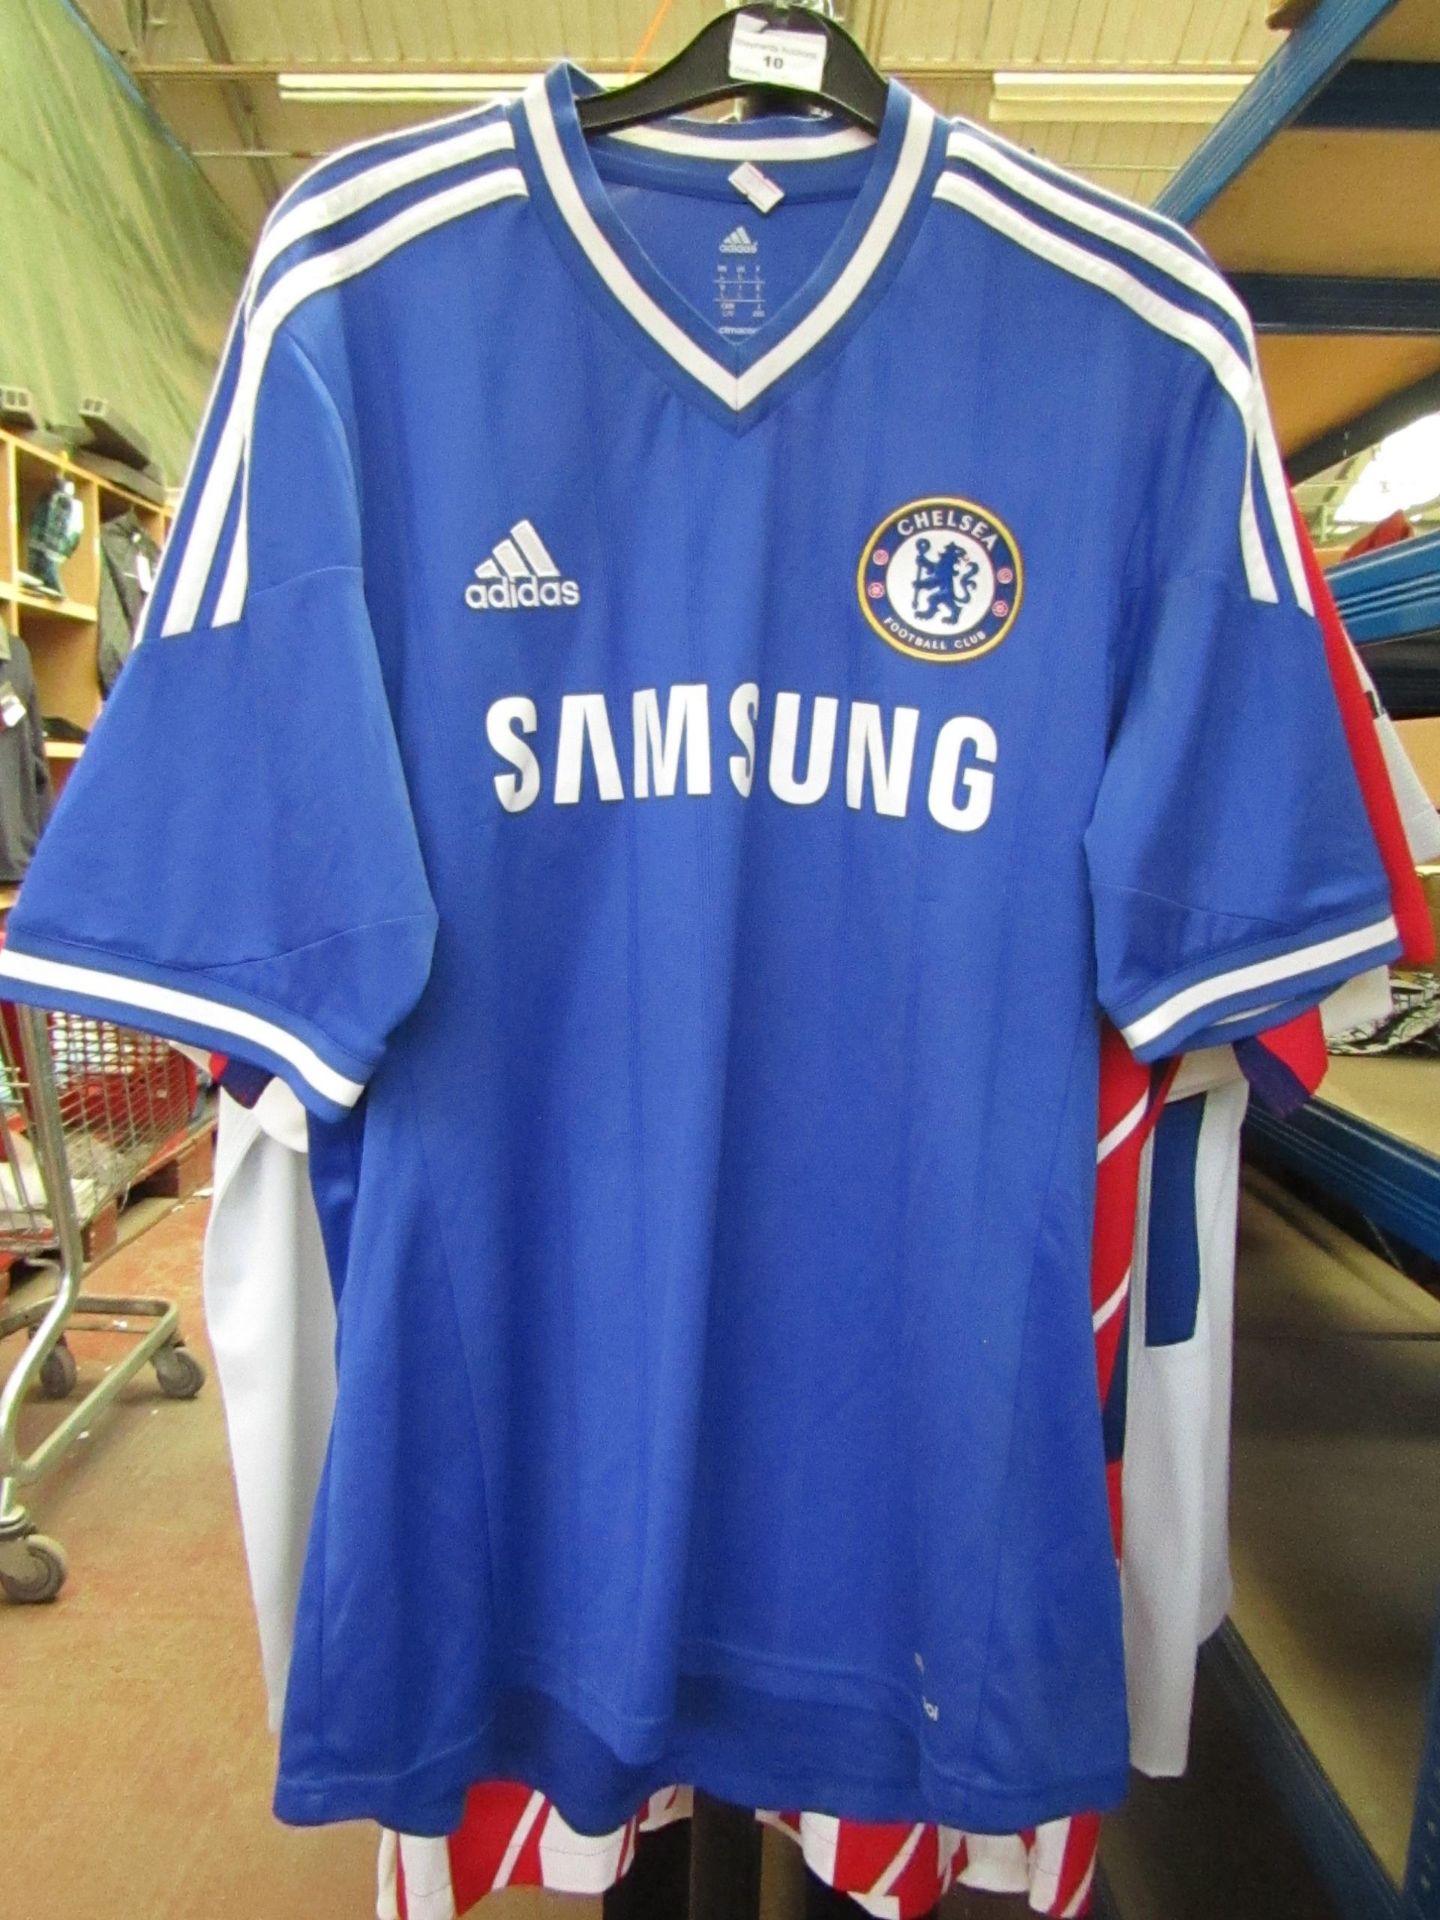 Chelsea Official Adidas Football Shirt size L see image